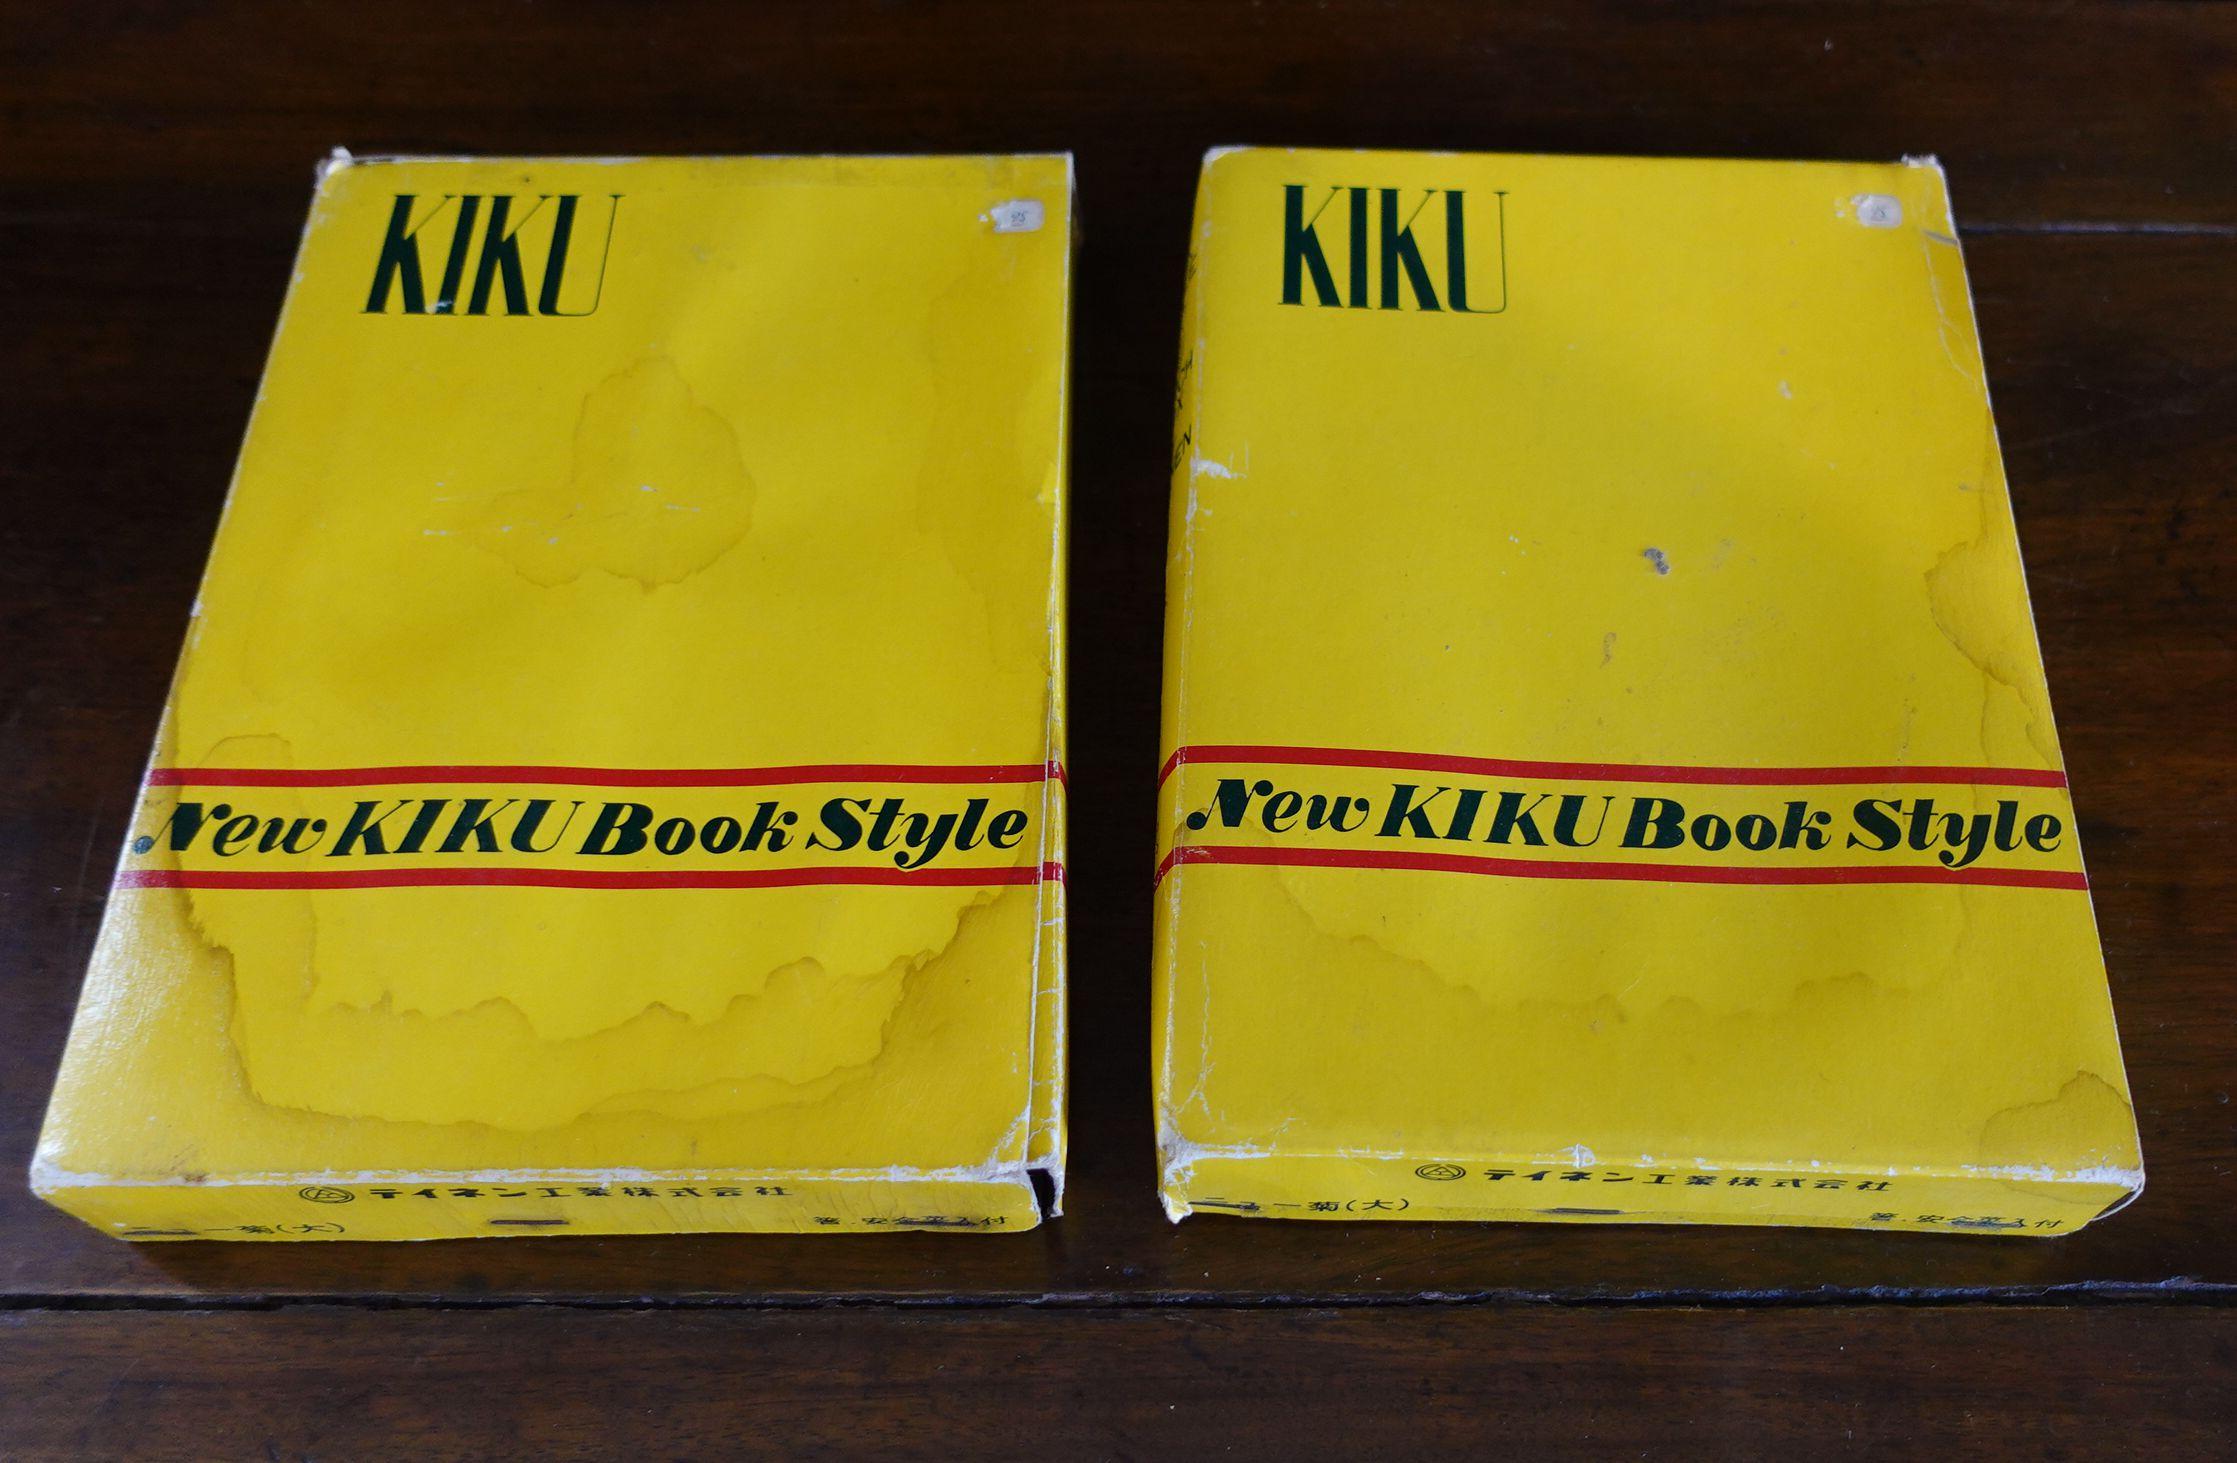 Two Japanese old fashion Kiku - book style lunchbox By Teinen.
The oldy memory after WWII in the school time of Japan.
A wonderful design of the Bento Box to include the independent rice box, chapstick with their own slot, and a larger box to